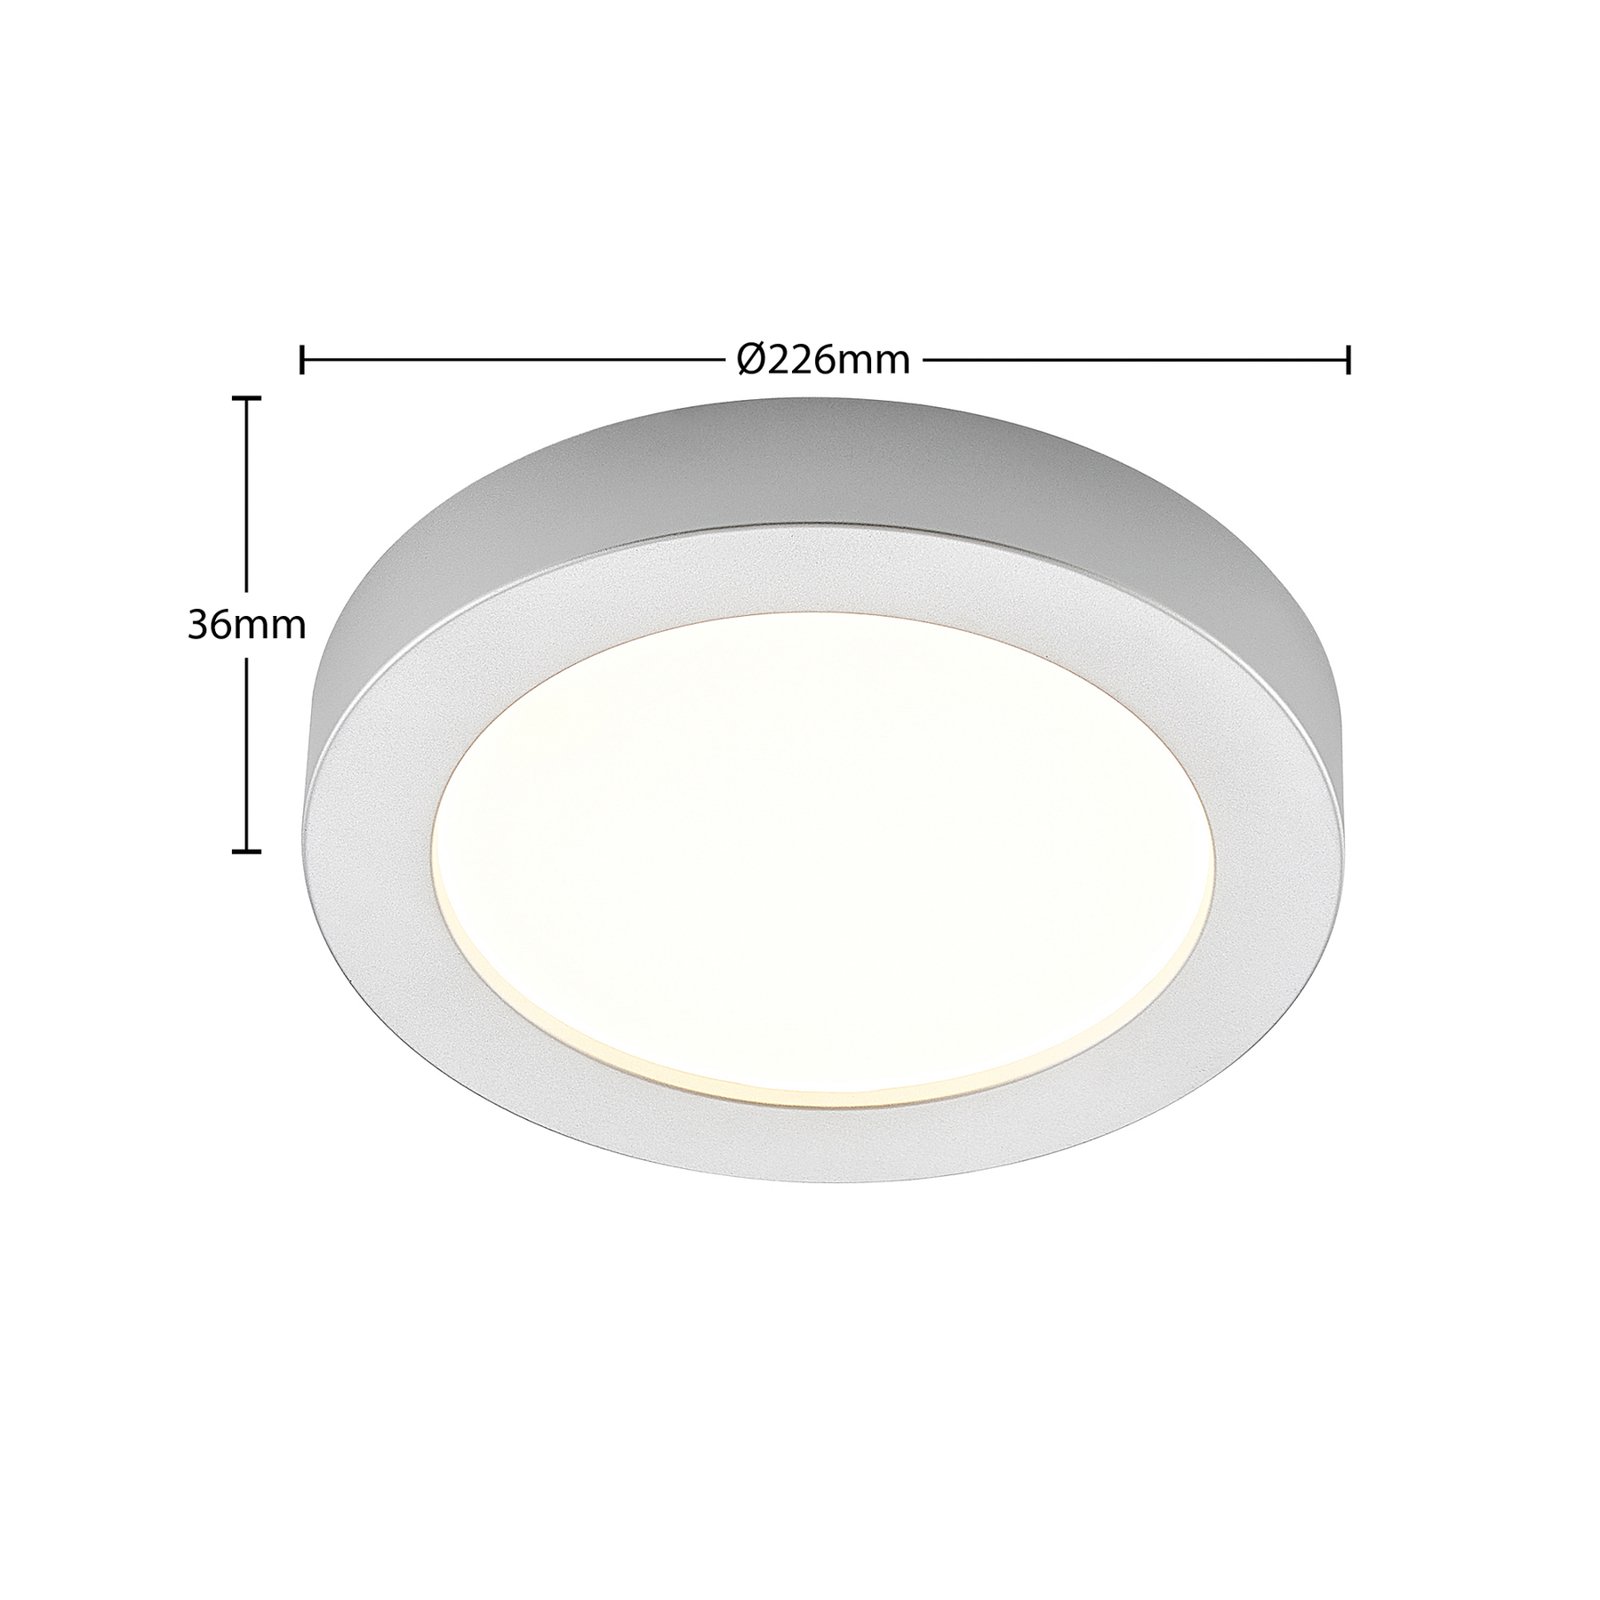 Prios LED ceiling lamp Edwina, silver, 22.6cm, 2pcs, dimmable